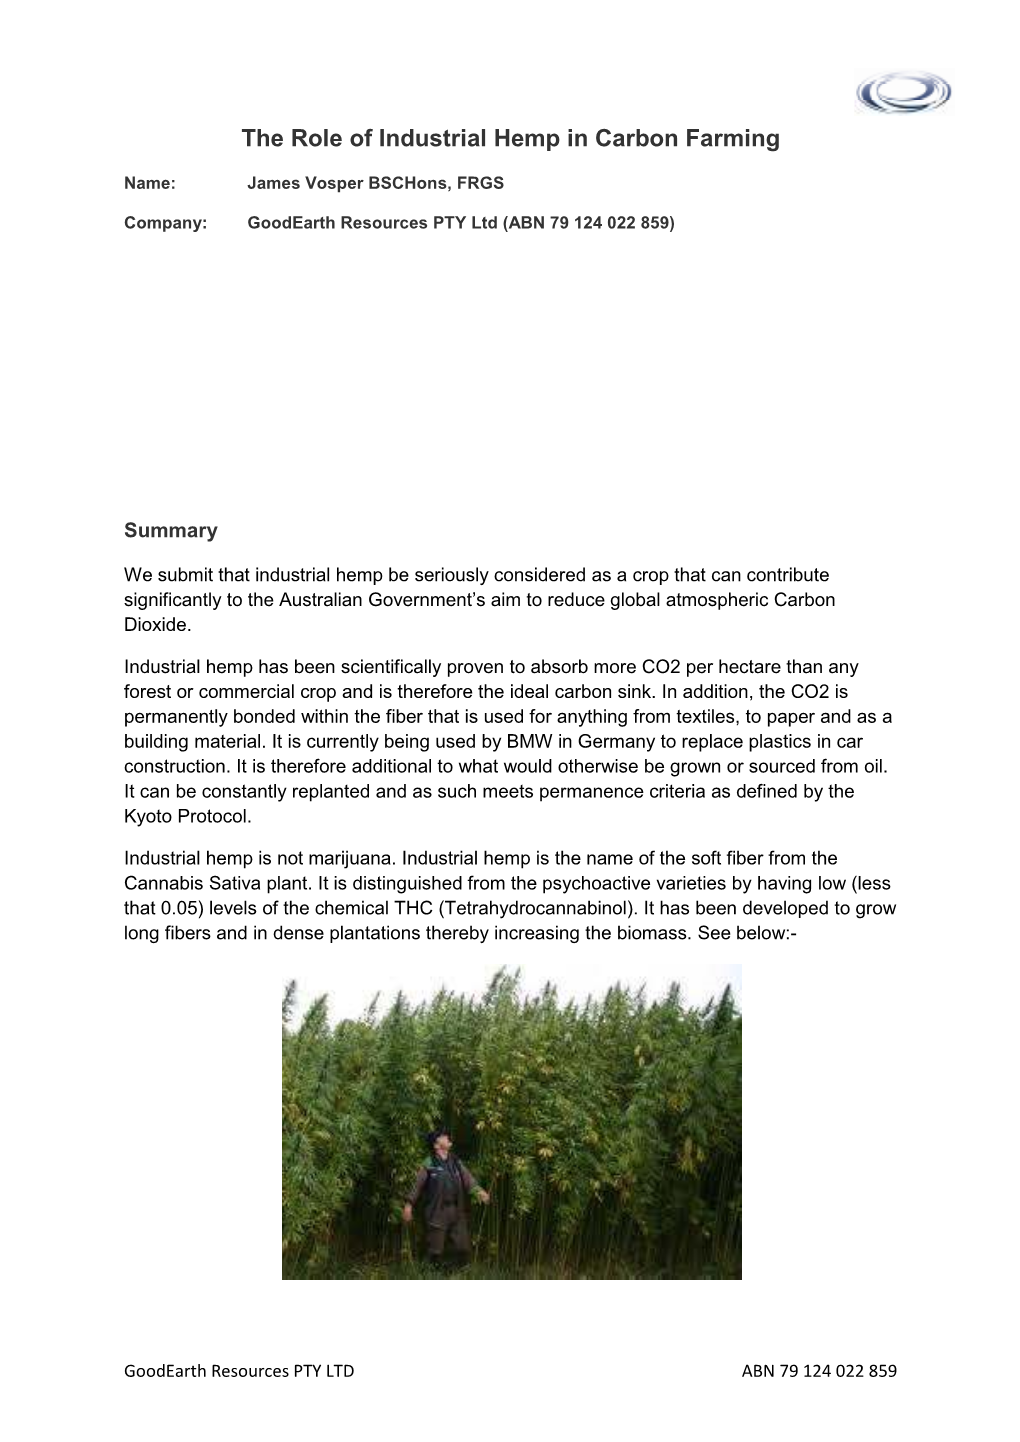 The Role of Industrial Hemp in Carbon Farming